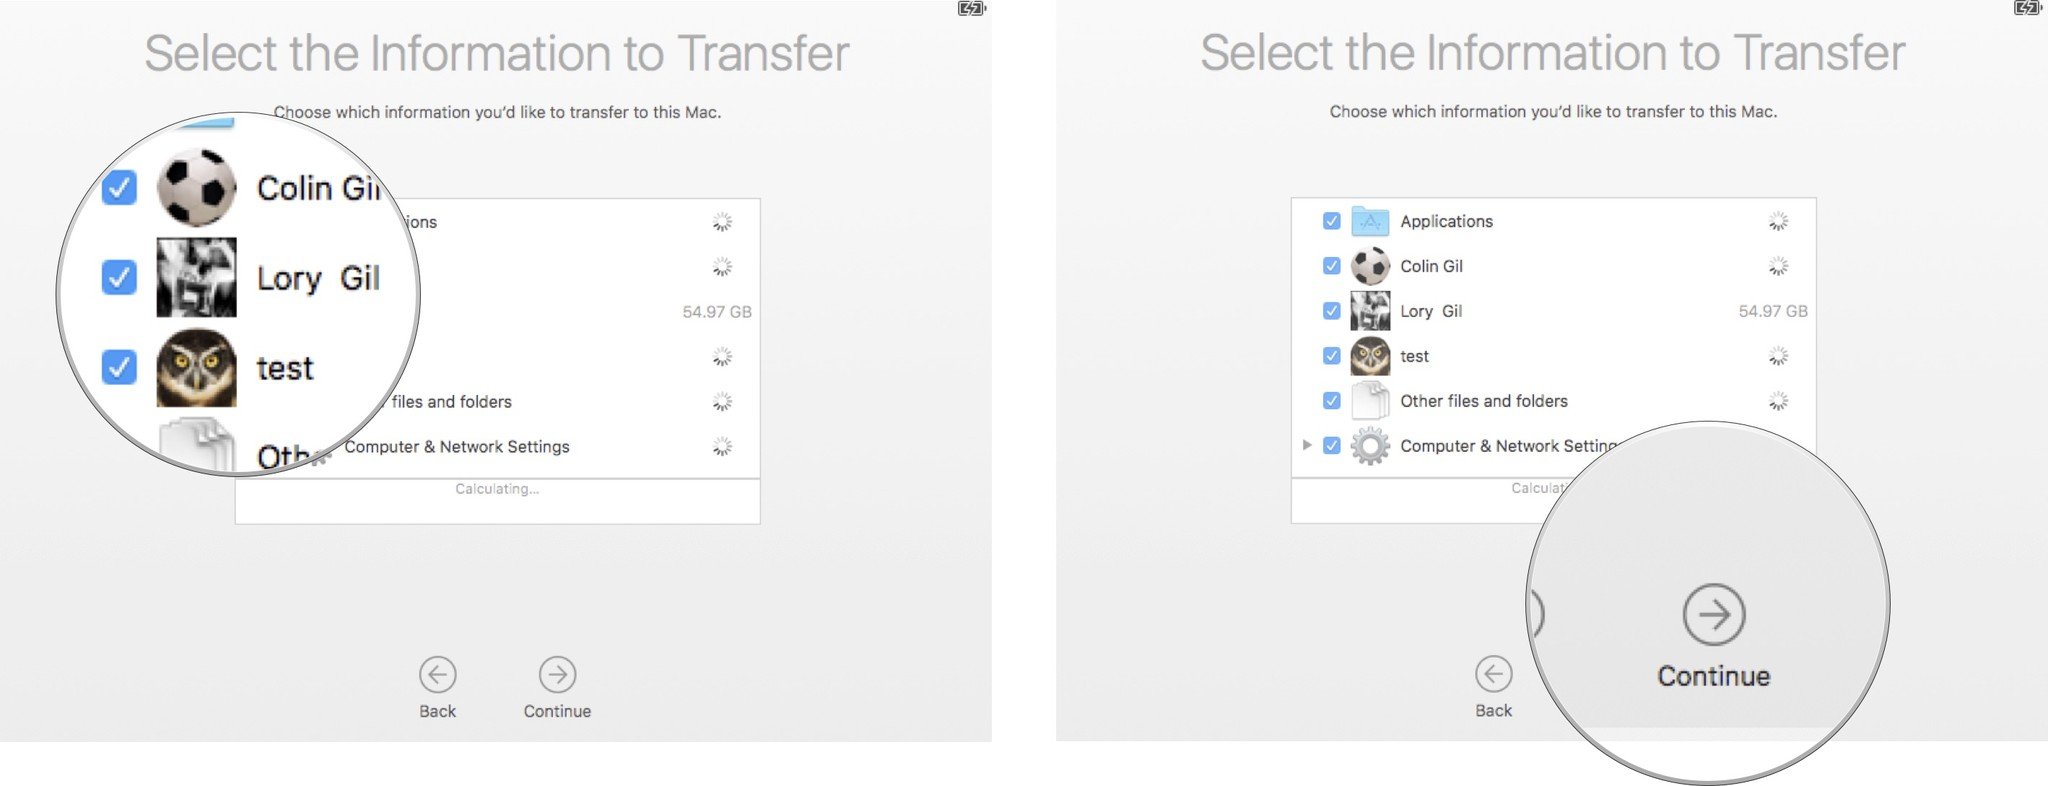 Select the files and folders you want to transfer to the new Mac, then click Continue